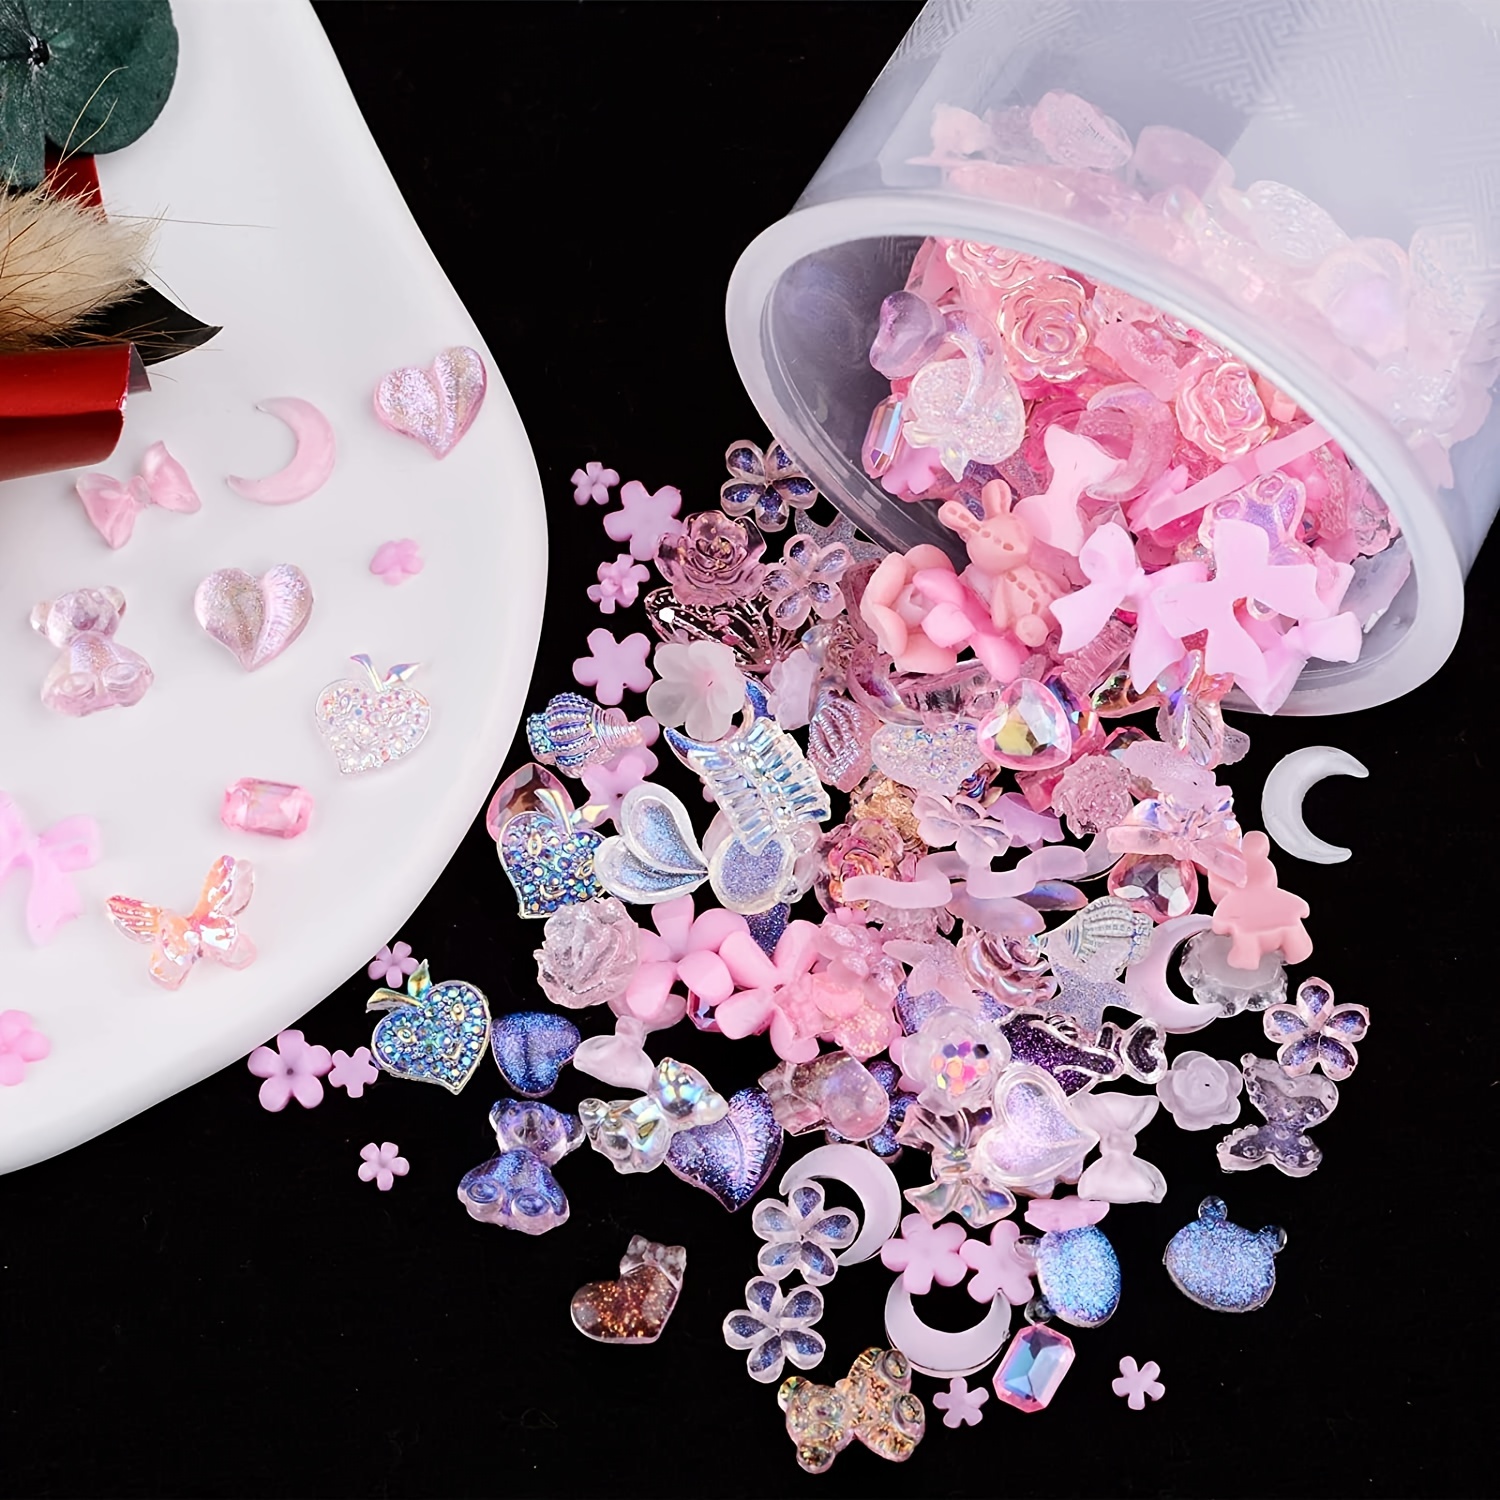 Decoden Resin Charms for hairclips, decorations